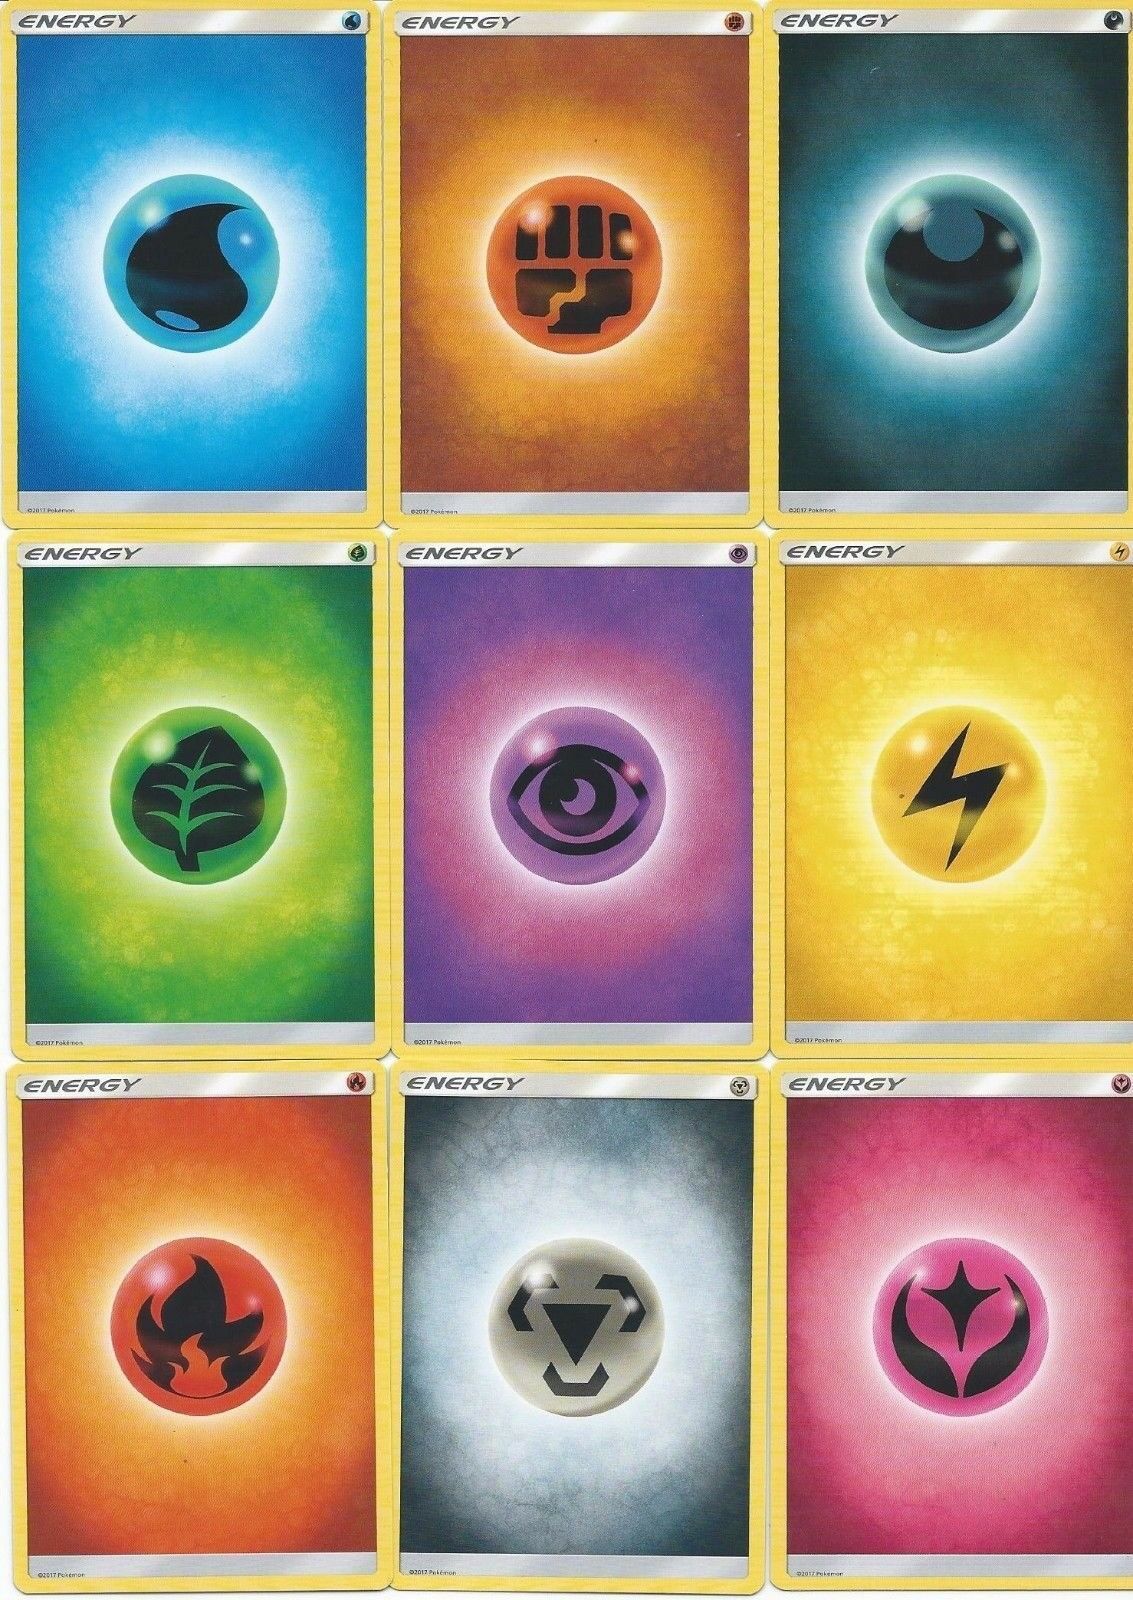 What are the different pokemon energy cards